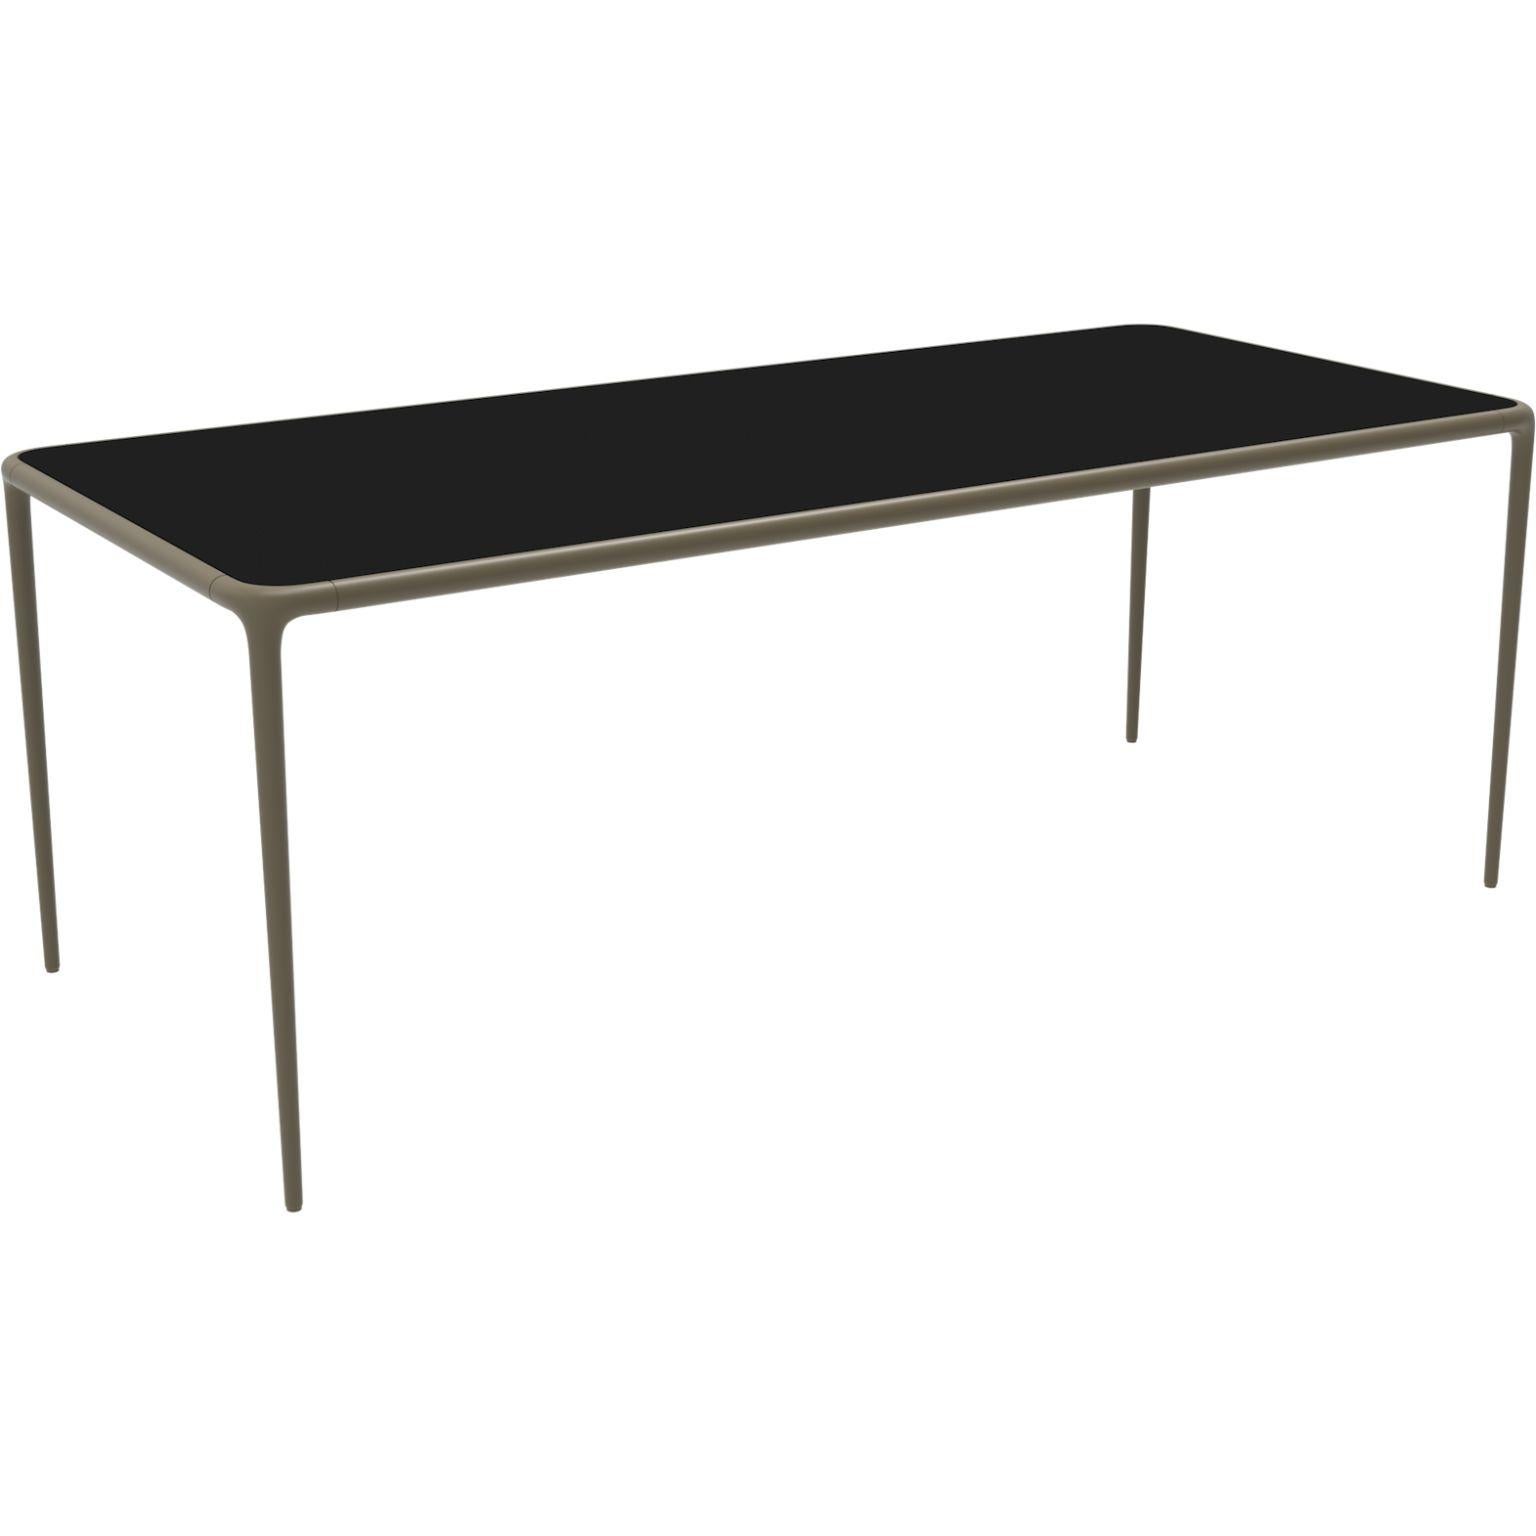 Xaloc bronze glass top 200 table by Mowee
Dimensions: D 200 x W 90 x H 74 cm
Material: Aluminium, tinted tempered glass top.
Also available in different aluminum colors and finishes (HPL Black Edge or Neolith).

Xaloc synthesizes the lines of